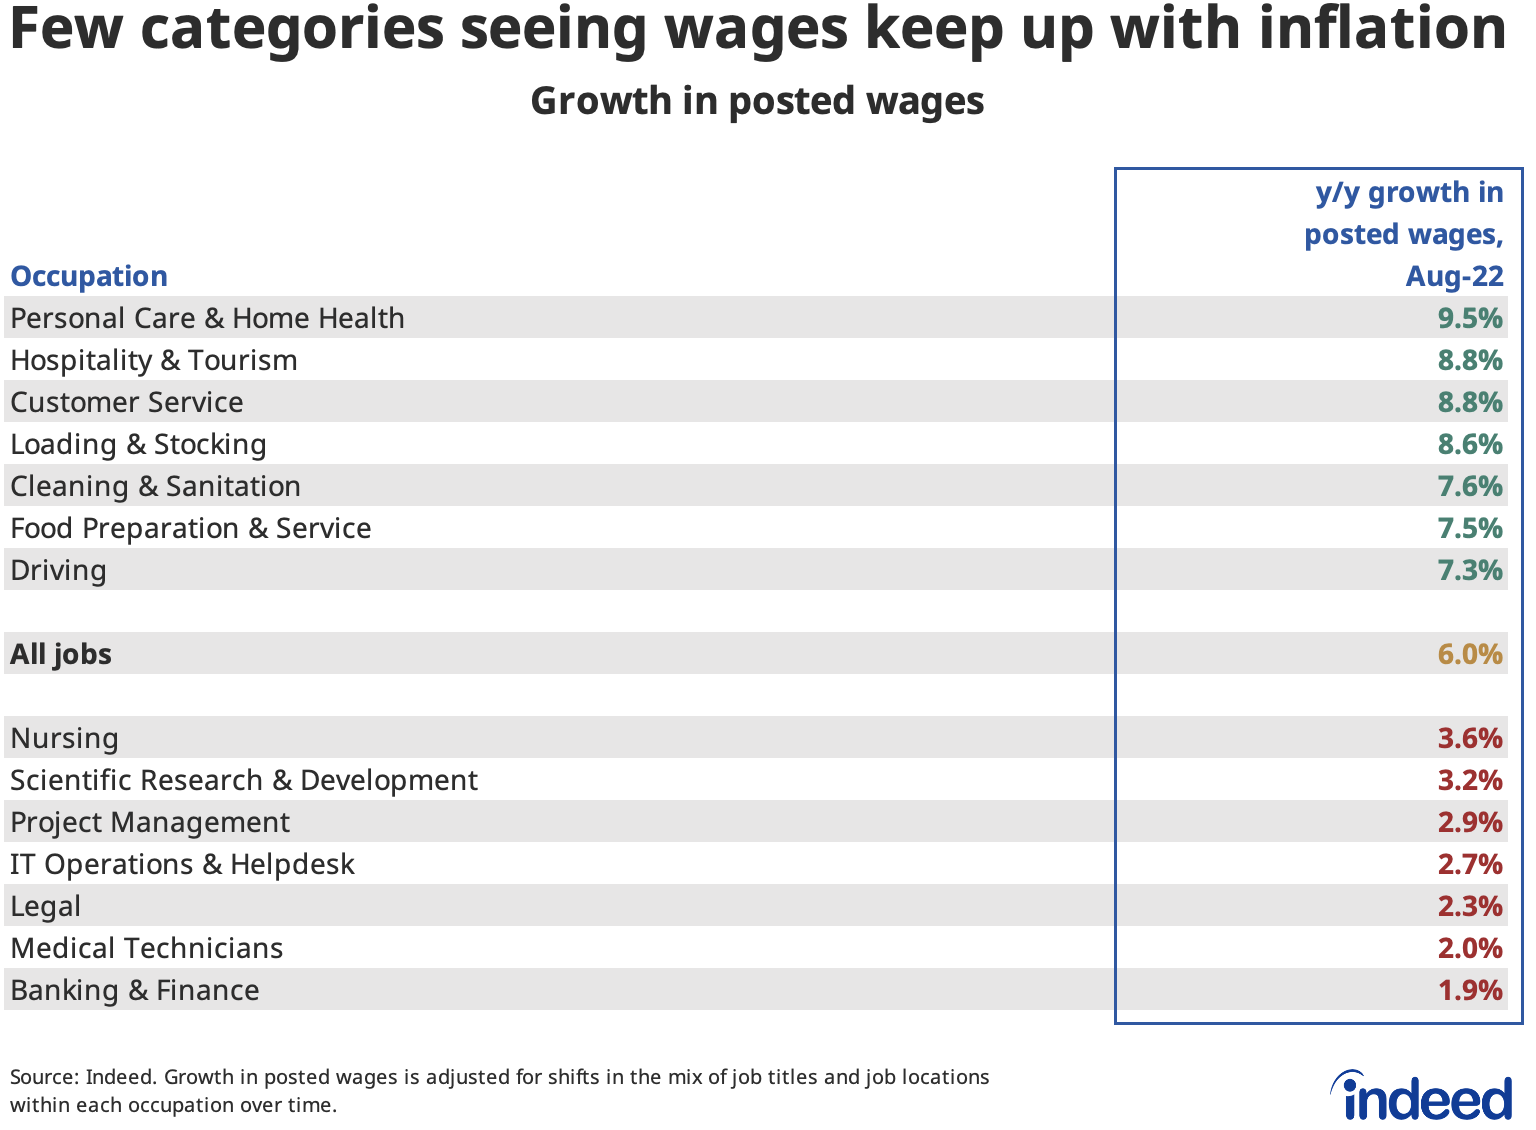 Table showing year-on-year growth in advertised wages in Indeed job postings across categories.